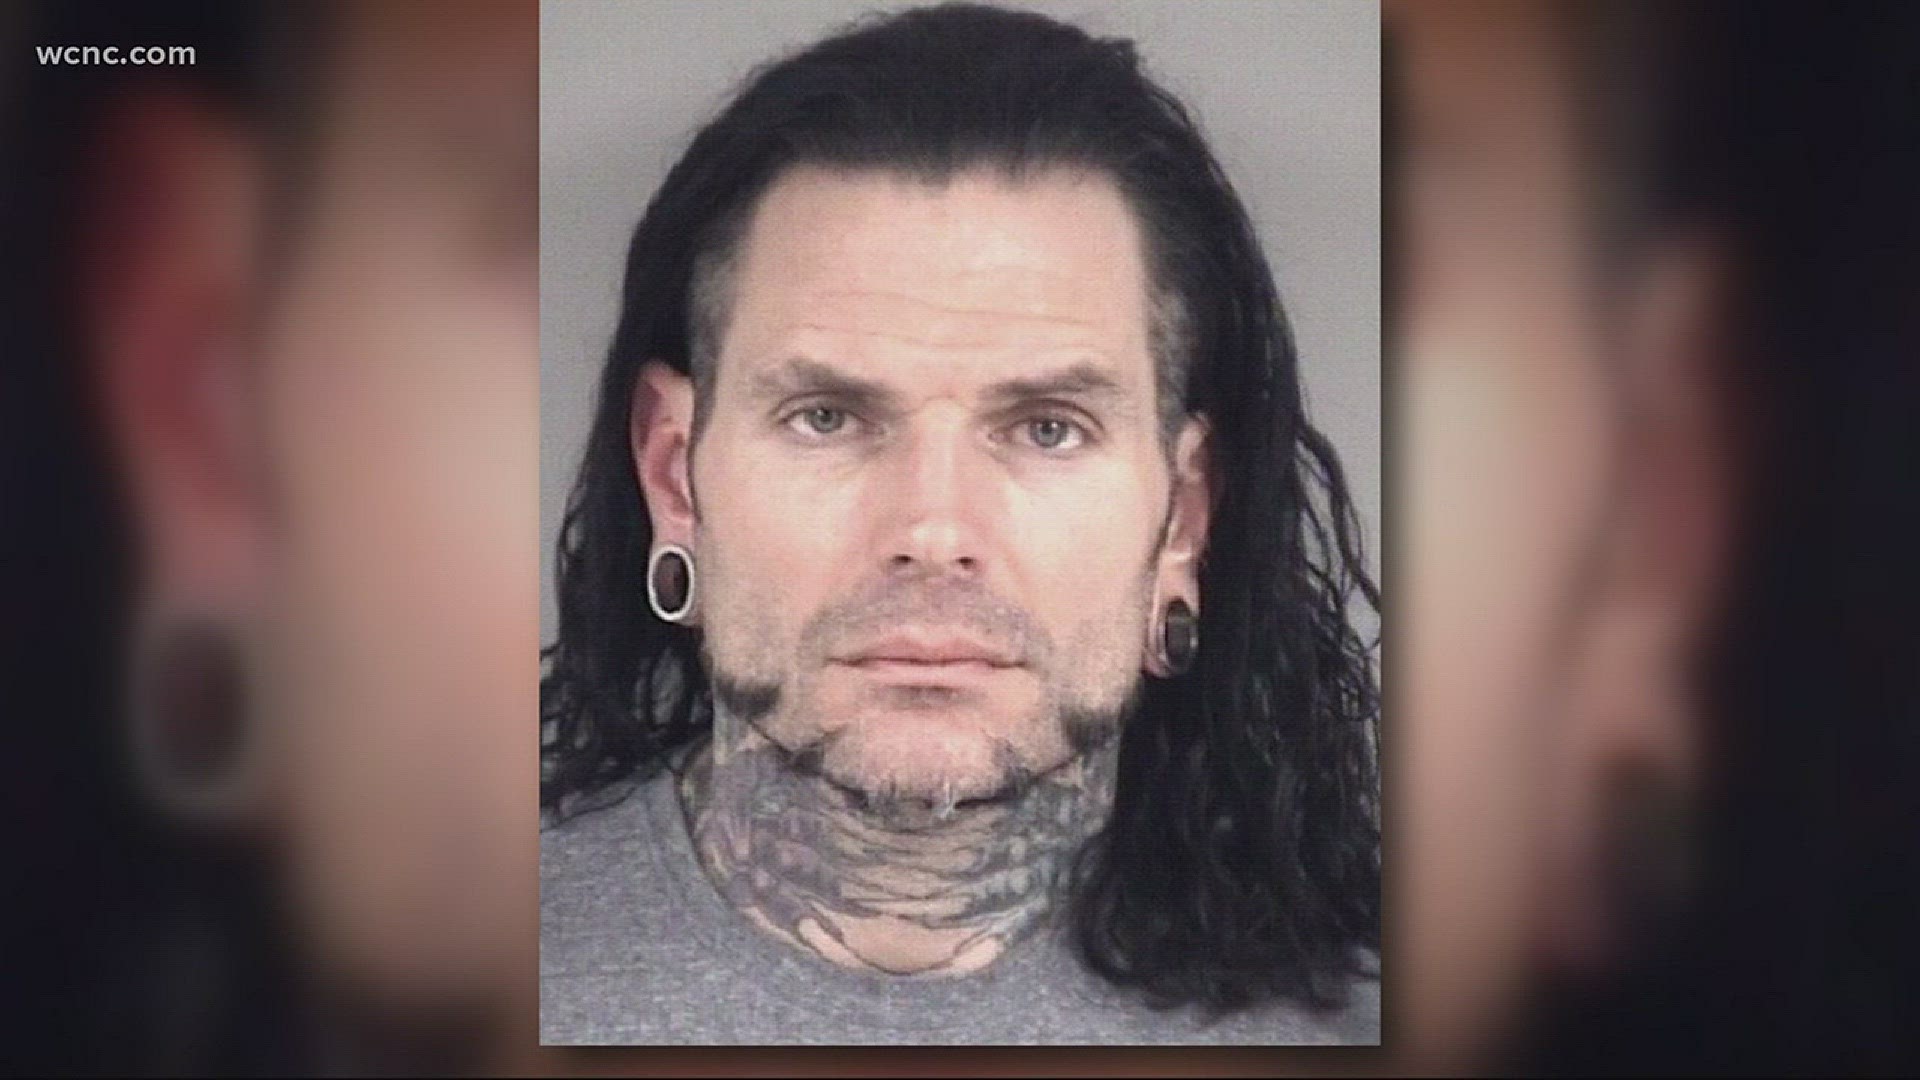 WWE star Jeff Hardy was arrested for driving under the influence over the weekend in Concord.